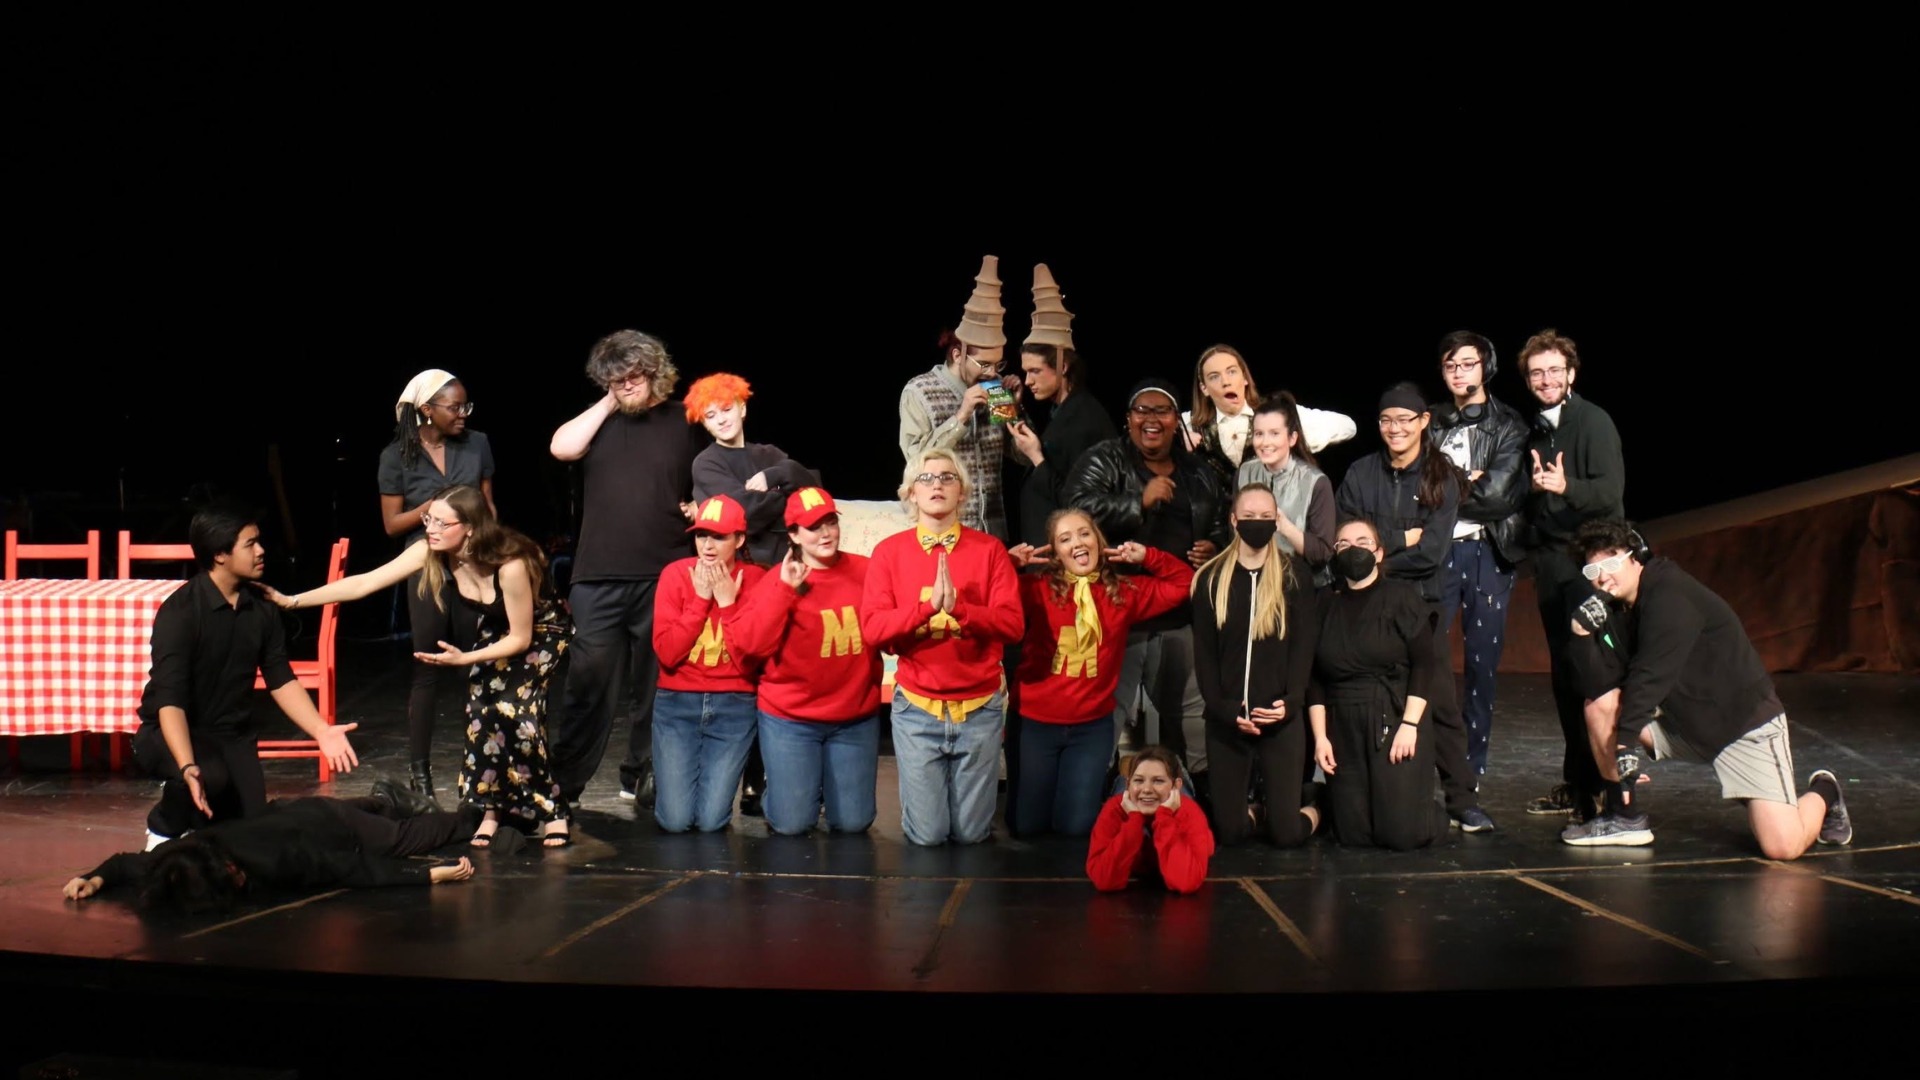 Funny theater group photo!